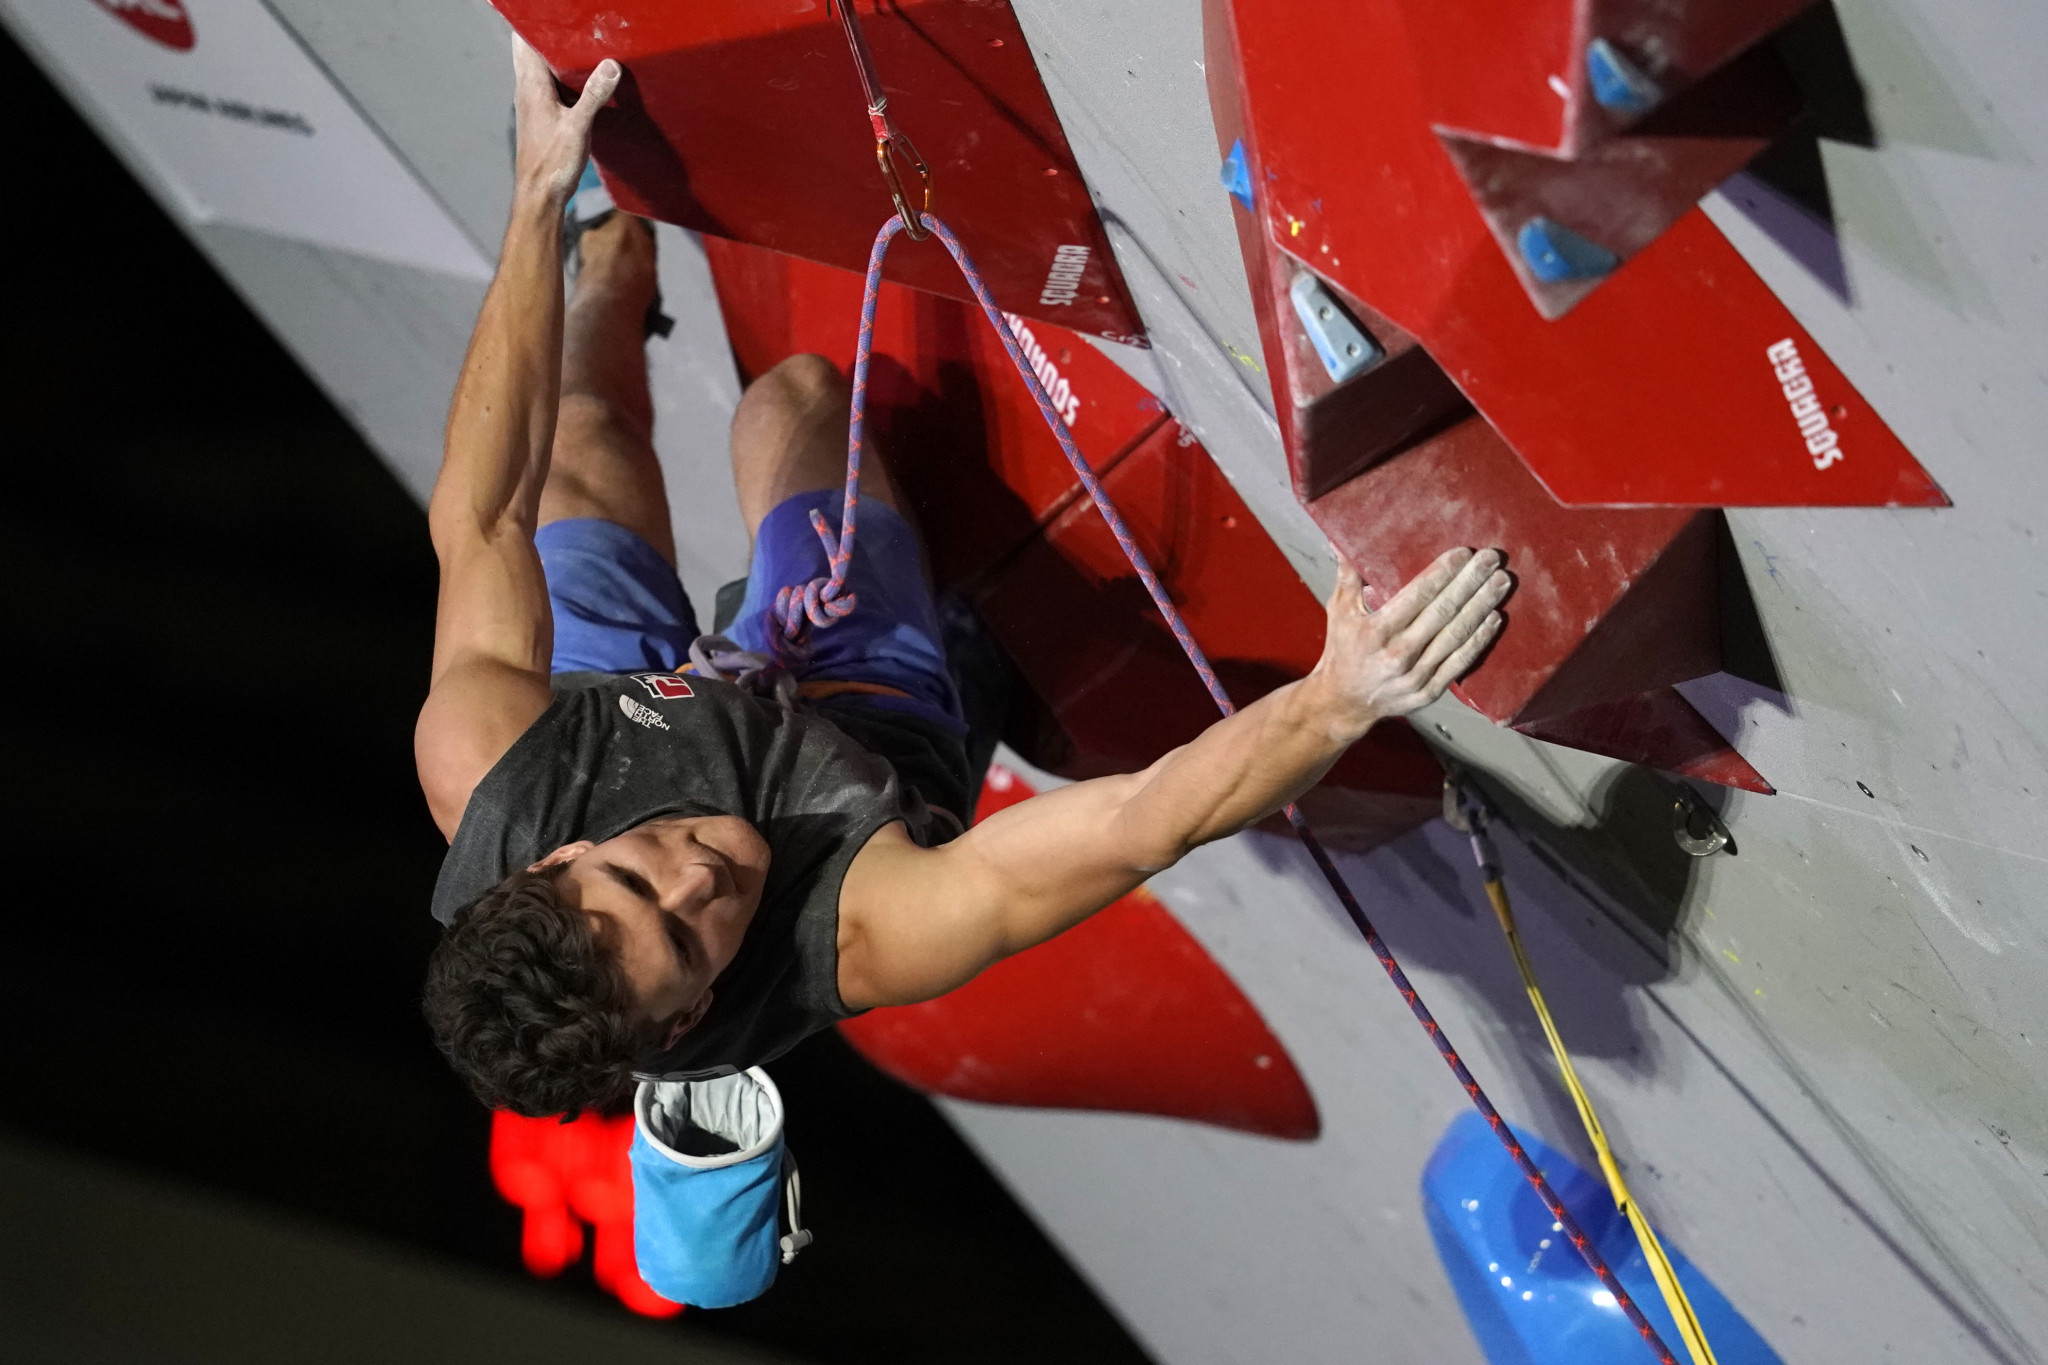 Nathaniel Coleman will hope to deliver success for hosts United States at the IFSC World Cup event in Salt Lake City ©Getty Images